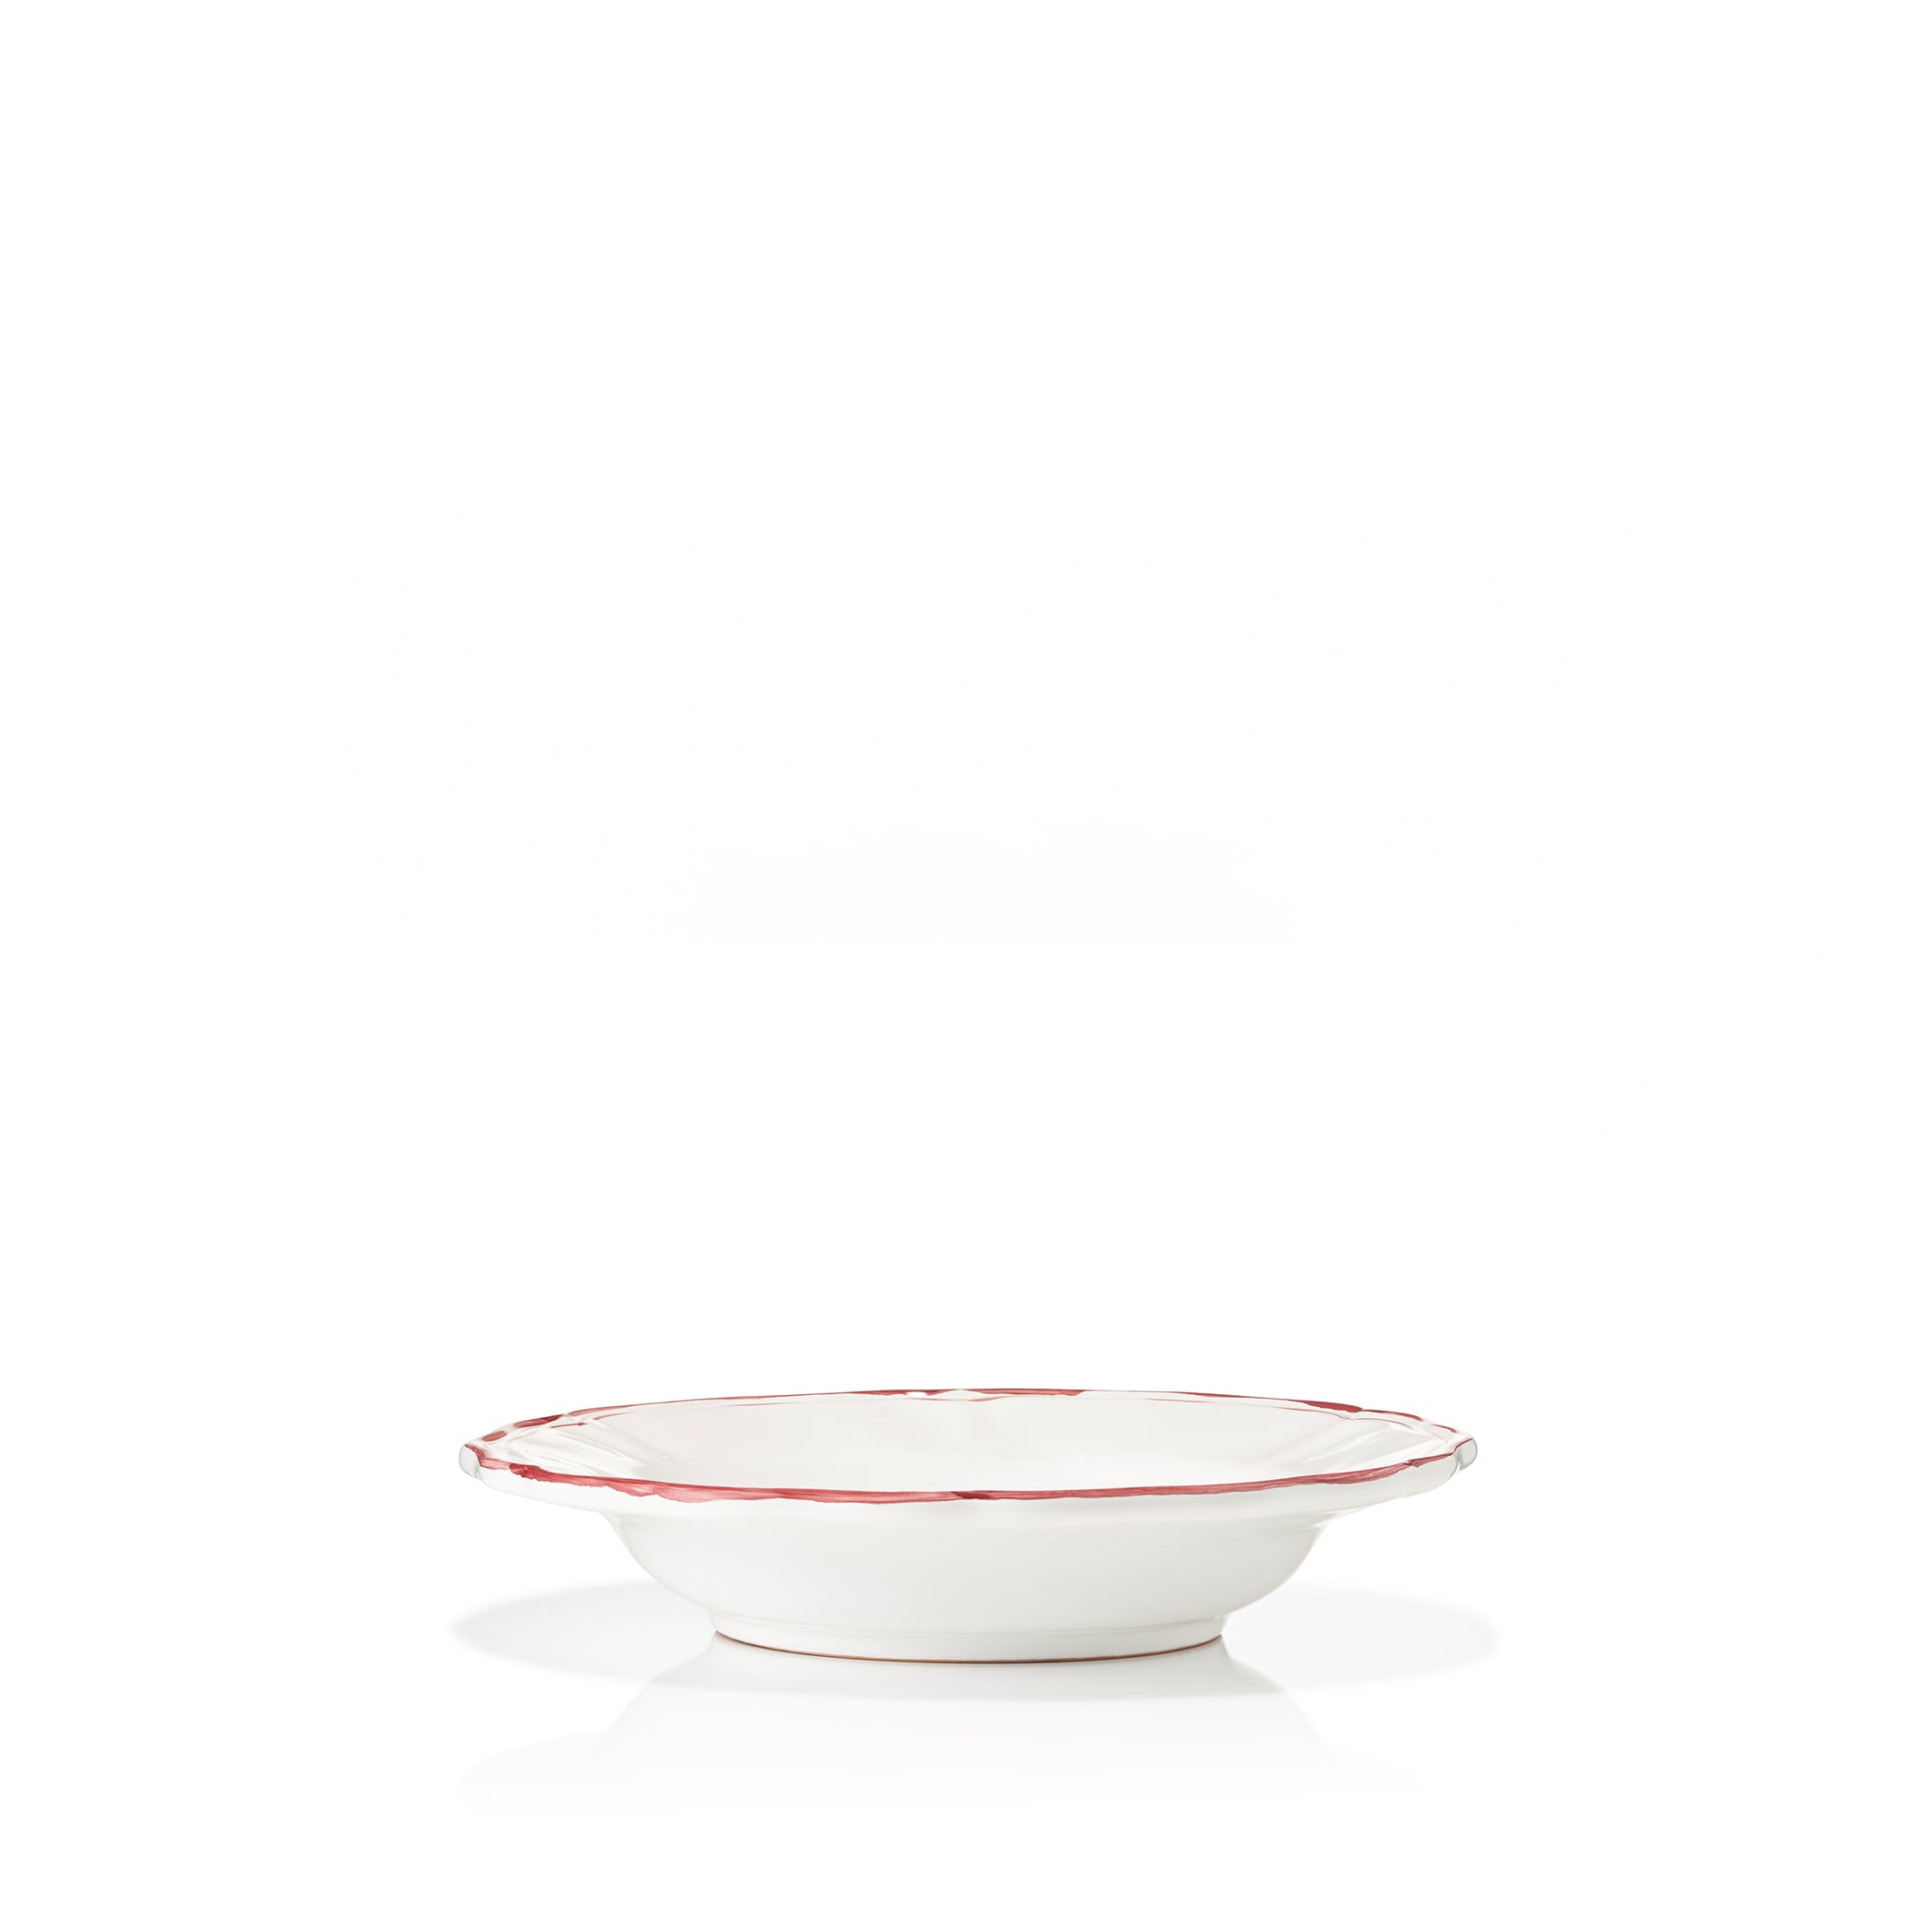 Scalloped Soup Plate With Red Double Rim, 25cm